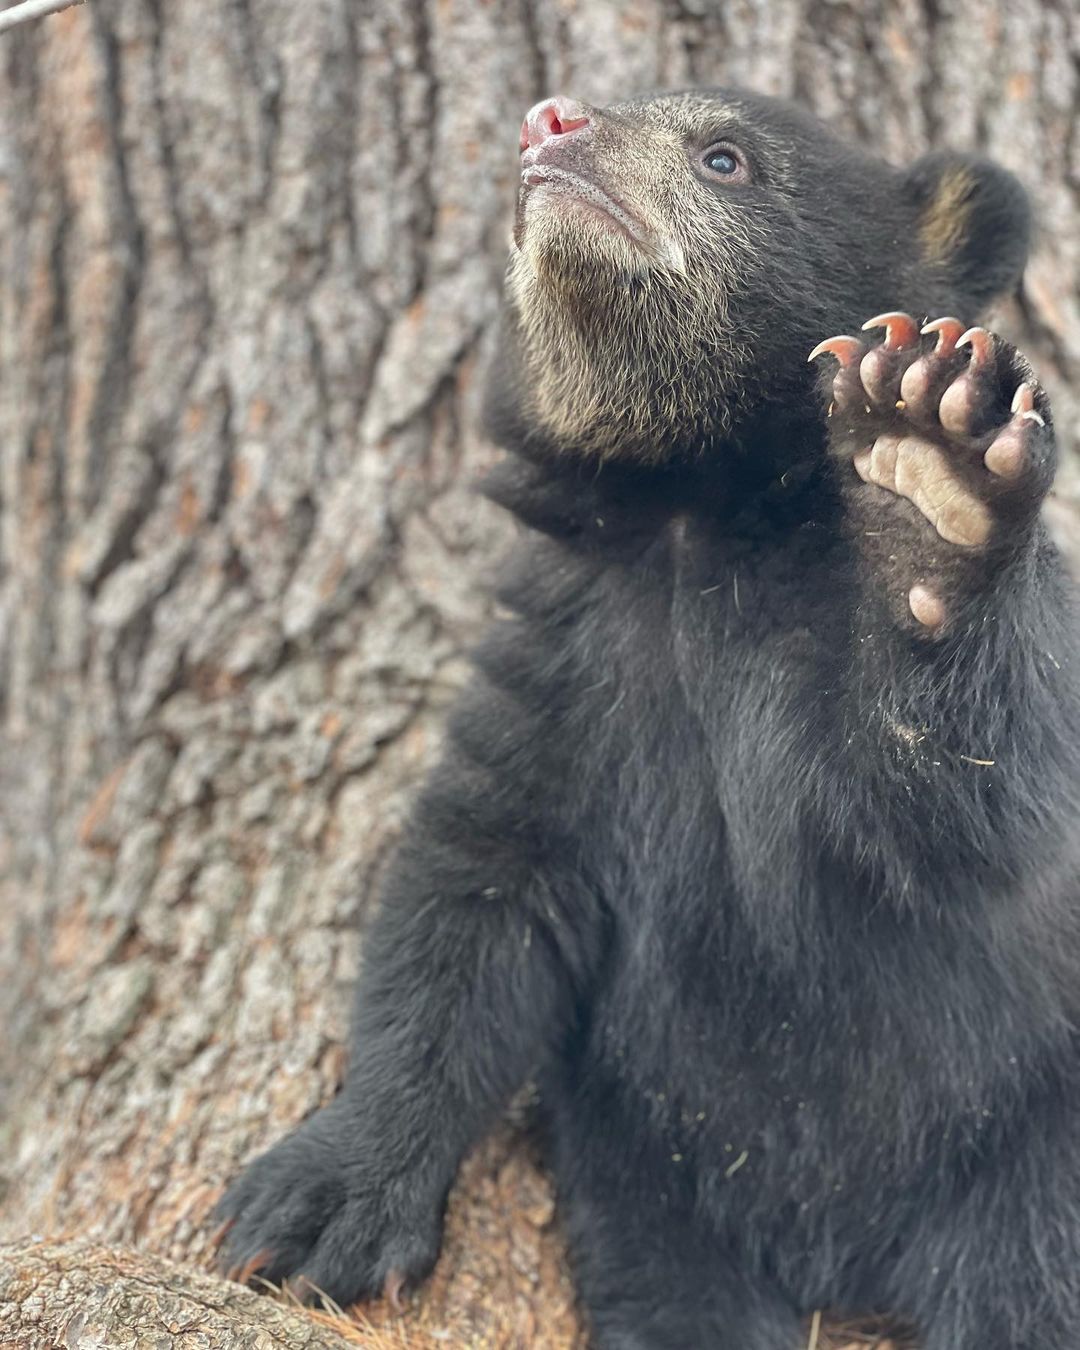 Many black bear cubs lose their mothers when mamma bears go searching for food near occupied areas by humans.